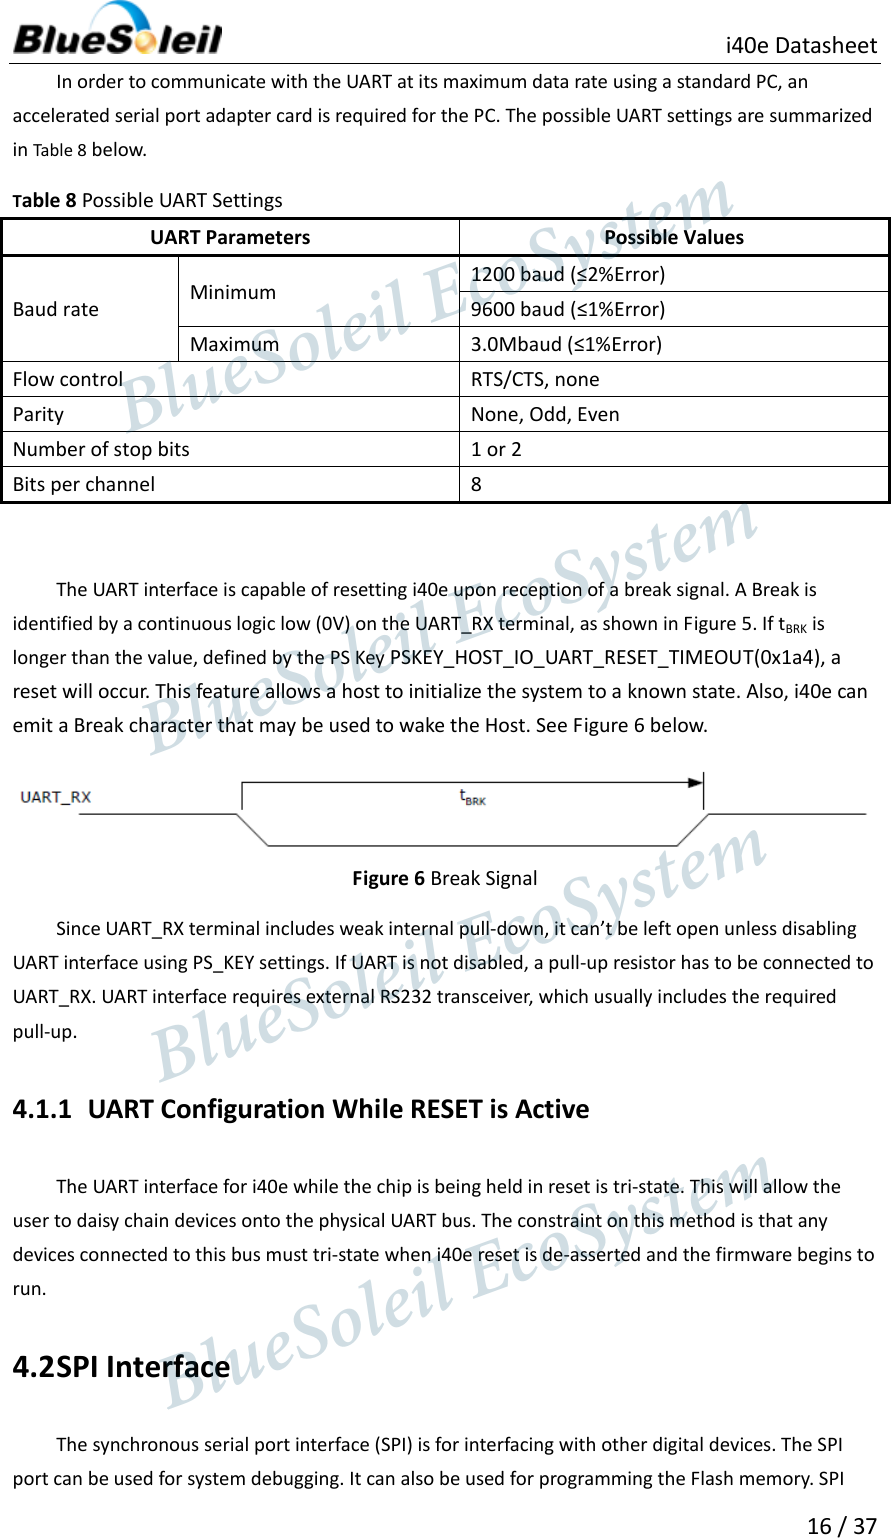                          i40e Datasheet  16 / 37  In order to communicate with the UART at its maximum data rate using a standard PC, an accelerated serial port adapter card is required for the PC. The possible UART settings are summarized in Table 8 below. Table 8 Possible UART Settings UART Parameters Possible Values Baud rate   Minimum   1200 baud (≤2%Error)   9600 baud (≤1%Error)   Maximum   3.0Mbaud (≤1%Error)   Flow control   RTS/CTS, none   Parity   None, Odd, Even   Number of stop bits   1 or 2   Bits per channel   8    The UART interface is capable of resetting i40e upon reception of a break signal. A Break is identified by a continuous logic low (0V) on the UART_RX terminal, as shown in Figure 5. If tBRK is longer than the value, defined by the PS Key PSKEY_HOST_IO_UART_RESET_TIMEOUT(0x1a4), a reset will occur. This feature allows a host to initialize the system to a known state. Also, i40e can emit a Break character that may be used to wake the Host. See Figure 6 below.  Figure 6 Break Signal Since UART_RX terminal includes weak internal pull-down, it can’t be left open unless disabling UART interface using PS_KEY settings. If UART is not disabled, a pull-up resistor has to be connected to UART_RX. UART interface requires external RS232 transceiver, which usually includes the required pull-up. 4.1.1 UART Configuration While RESET is Active   The UART interface for i40e while the chip is being held in reset is tri-state. This will allow the user to daisy chain devices onto the physical UART bus. The constraint on this method is that any devices connected to this bus must tri-state when i40e reset is de-asserted and the firmware begins to run.   4.2 SPI Interface The synchronous serial port interface (SPI) is for interfacing with other digital devices. The SPI port can be used for system debugging. It can also be used for programming the Flash memory. SPI                  BlueSoleil EcoSystem            BlueSoleil EcoSystem      BlueSoleil EcoSystemBlueSoleil EcoSystem